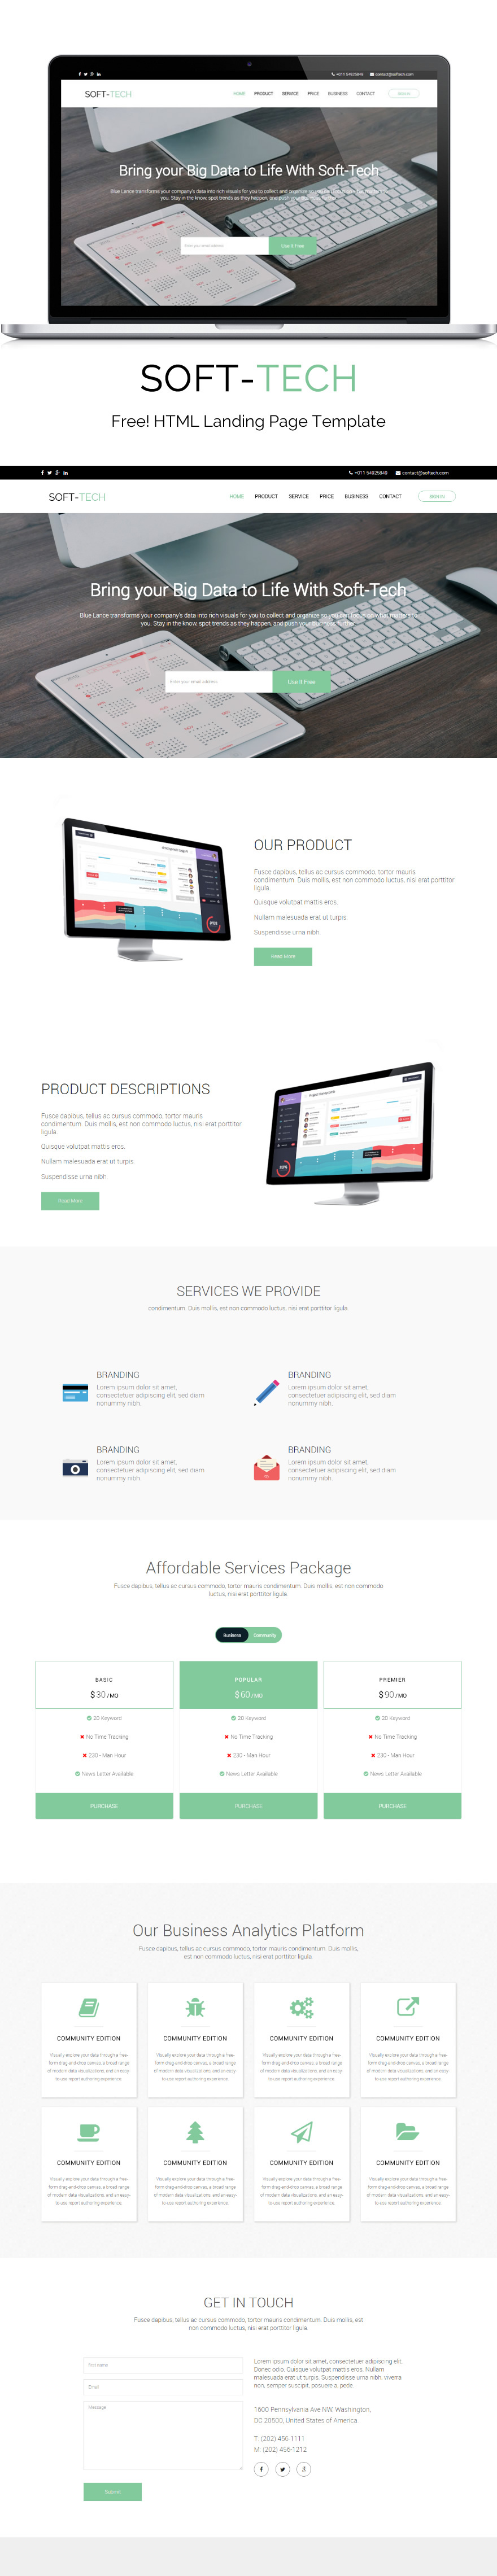 free html HTML Landing page Bootstrap landing page freebie html software landing page bootstrap Bootstrap template